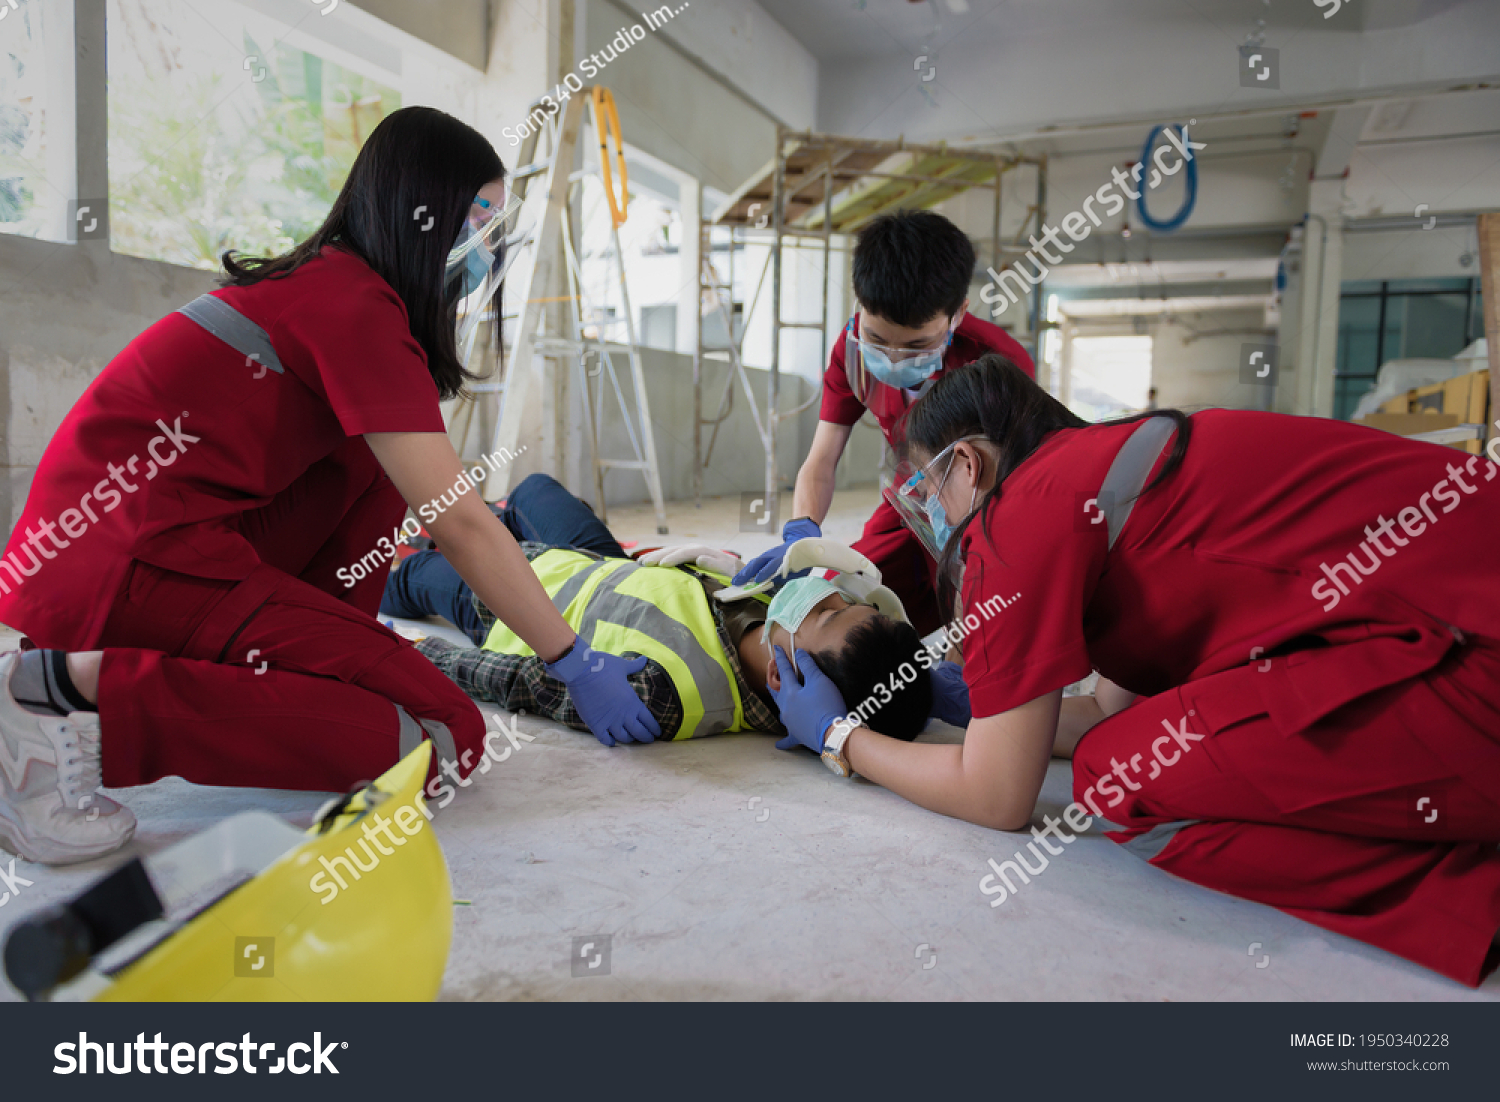 First aid for head injuries and Considered for all trauma incidents of worker in work, Loss of feeling or loss of normal movement and Loss of function in limbs, First aid training to transfer patient. #1950340228